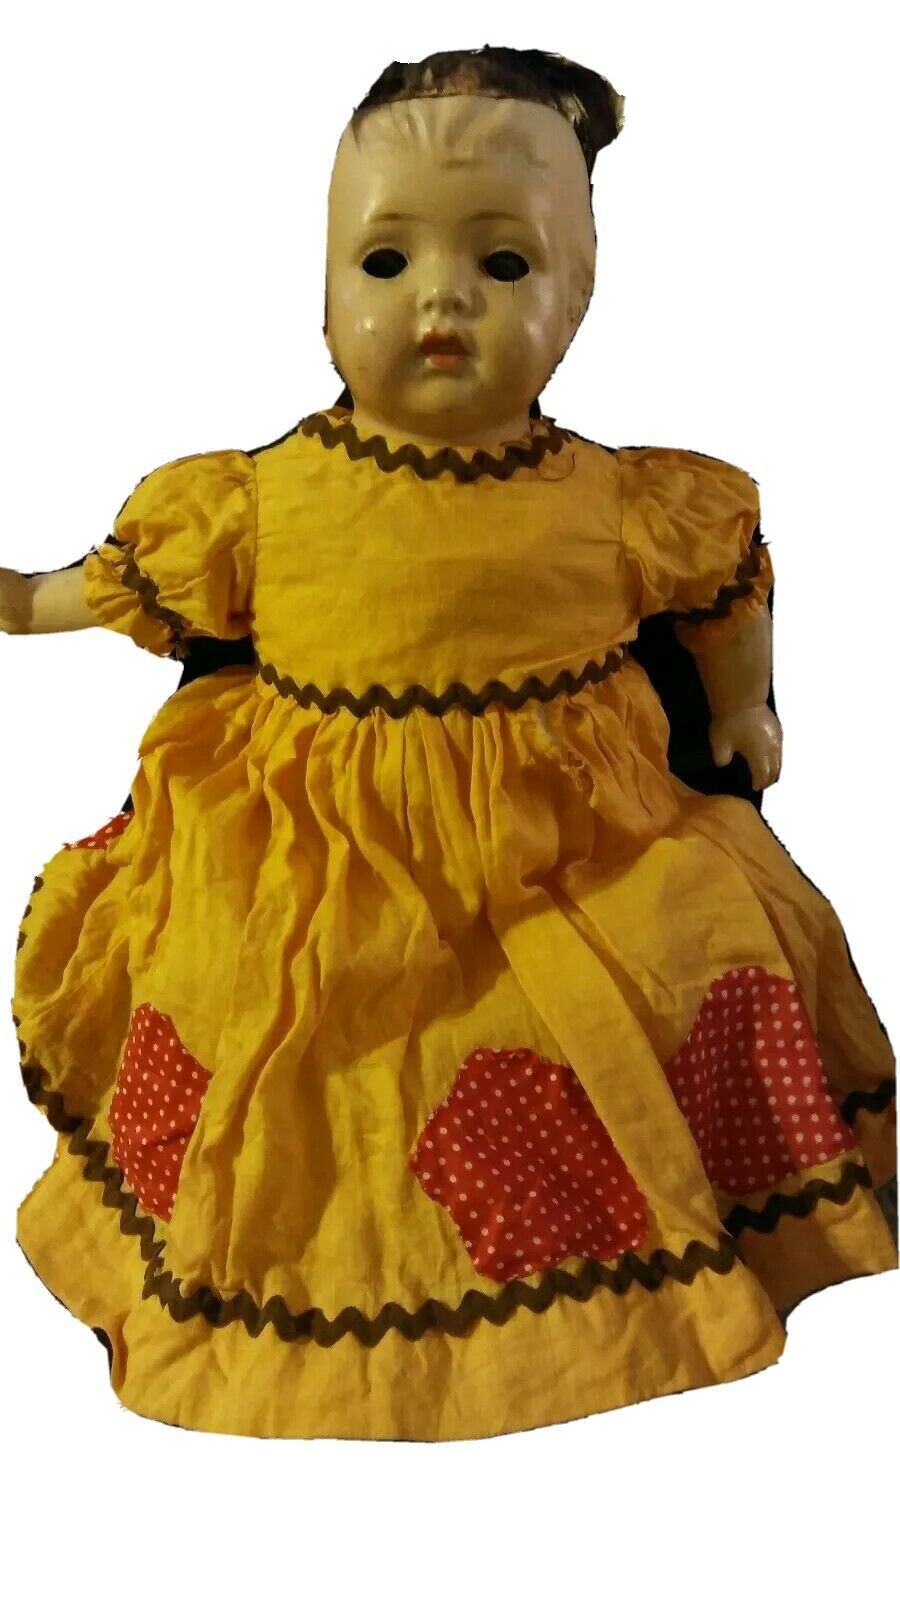 Antique Doll Genuinely Scary Antique Creepy Rare Oddity Baby Girl